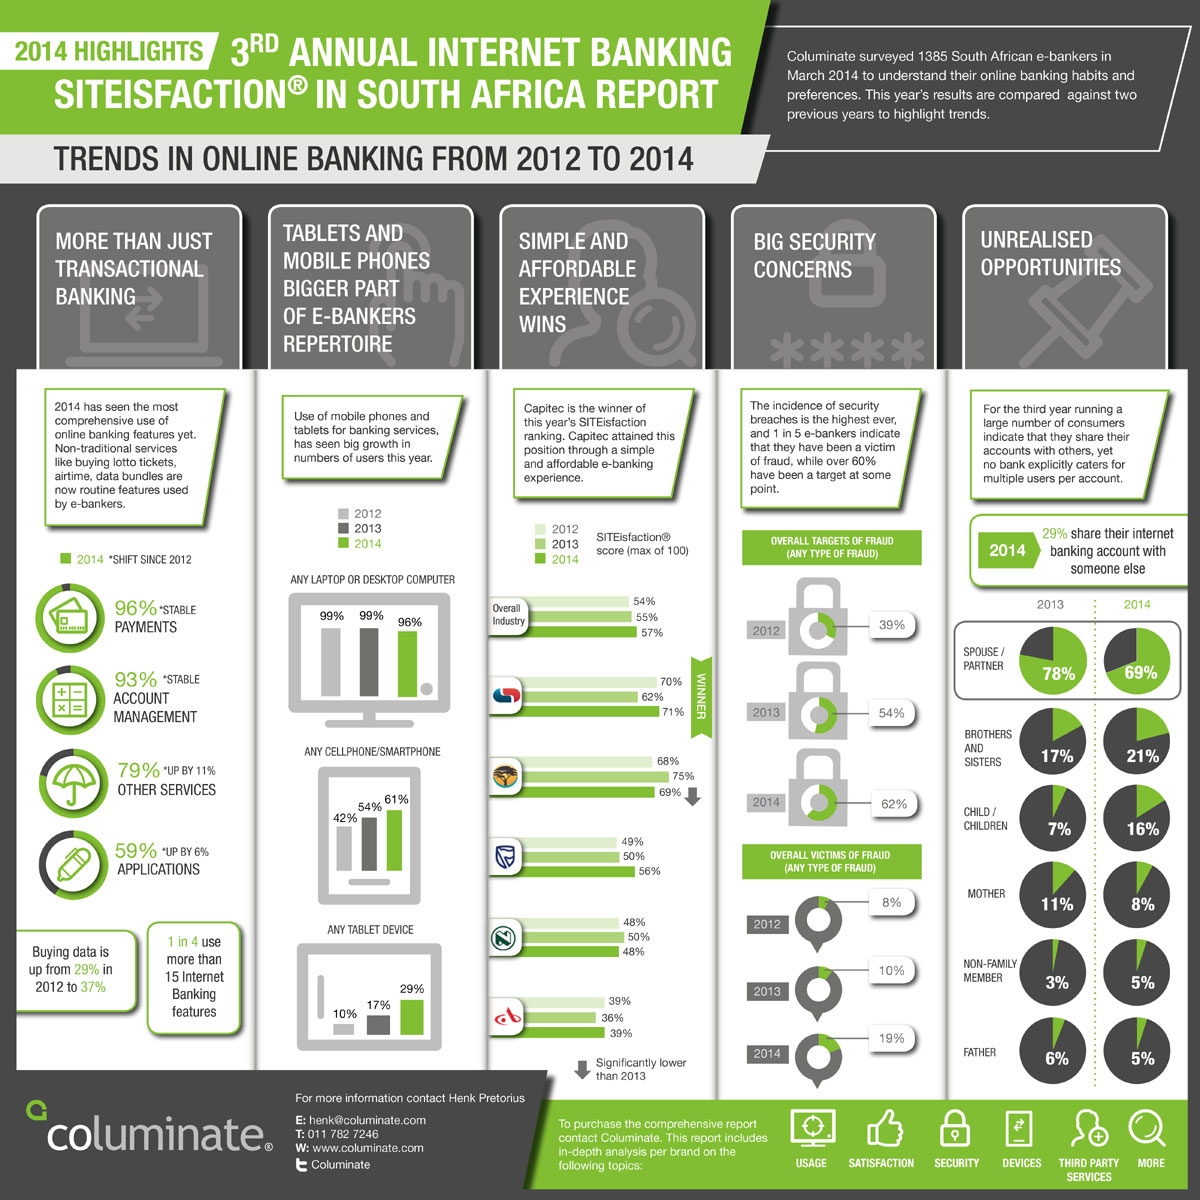 2014 Internet banking SITEisfaction survey shows improvement in sector